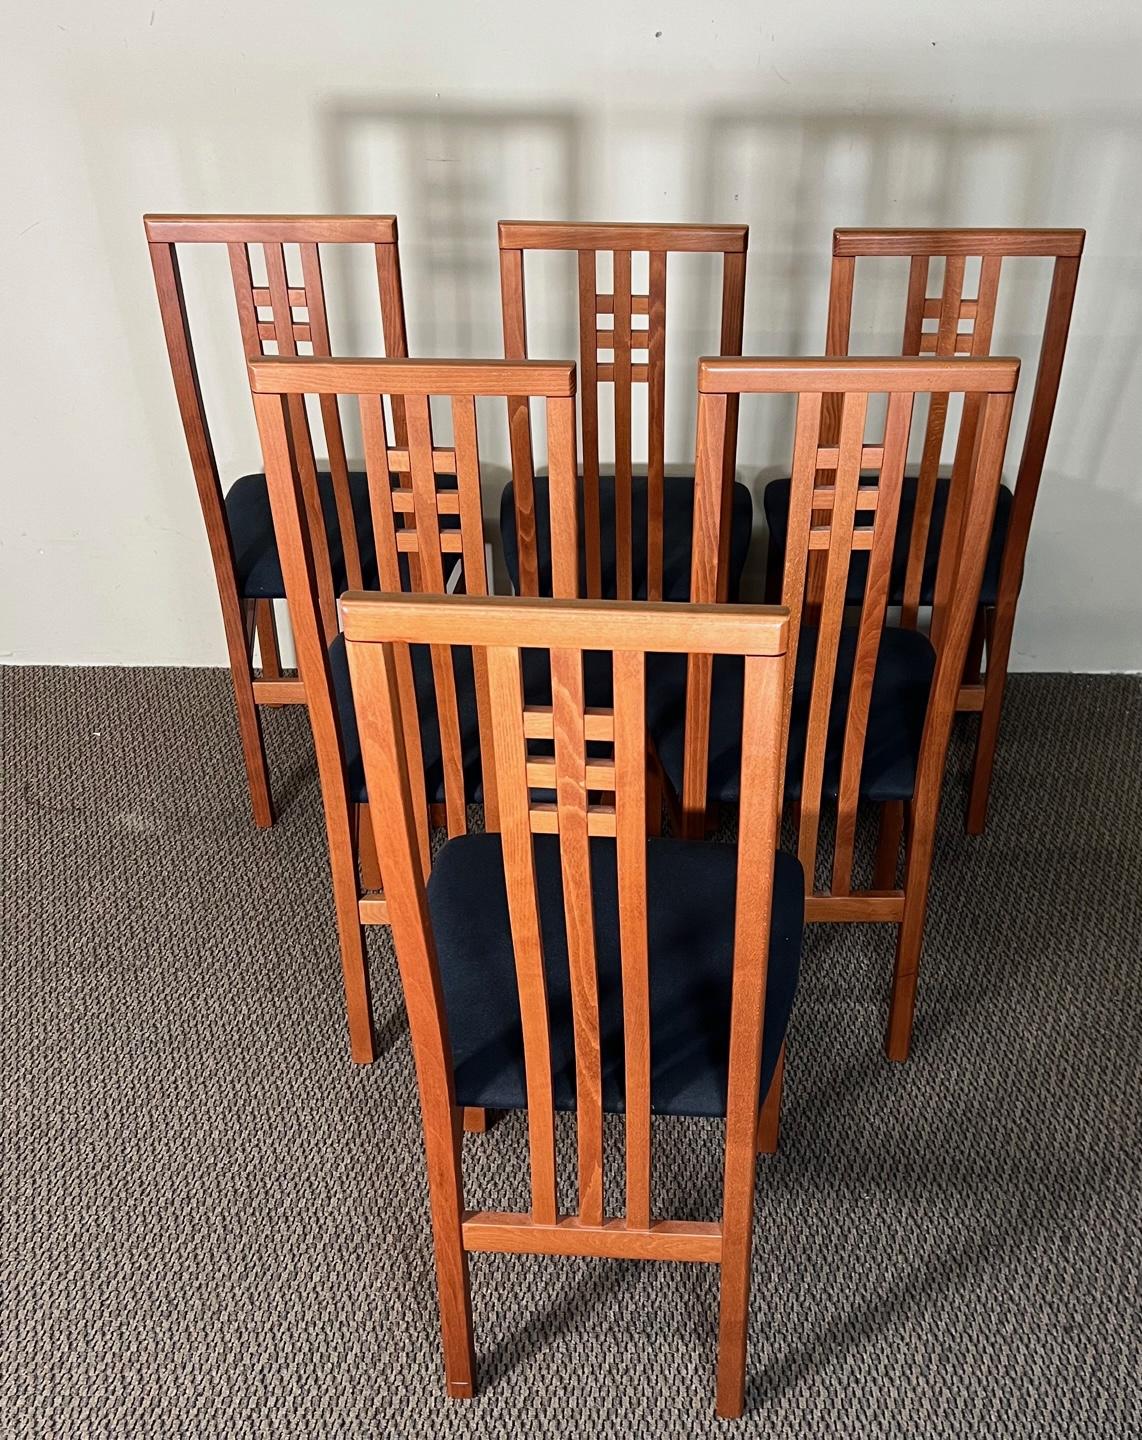 Beautiful set of 6 high back Italian dining chairs. Wood appears to be stained cherry wood. Made by IMS SRL. Made in Italy. Original label still present underneath some of the chairs. Dark blue wool upholstery. 
Stains on one of the seats. Minor